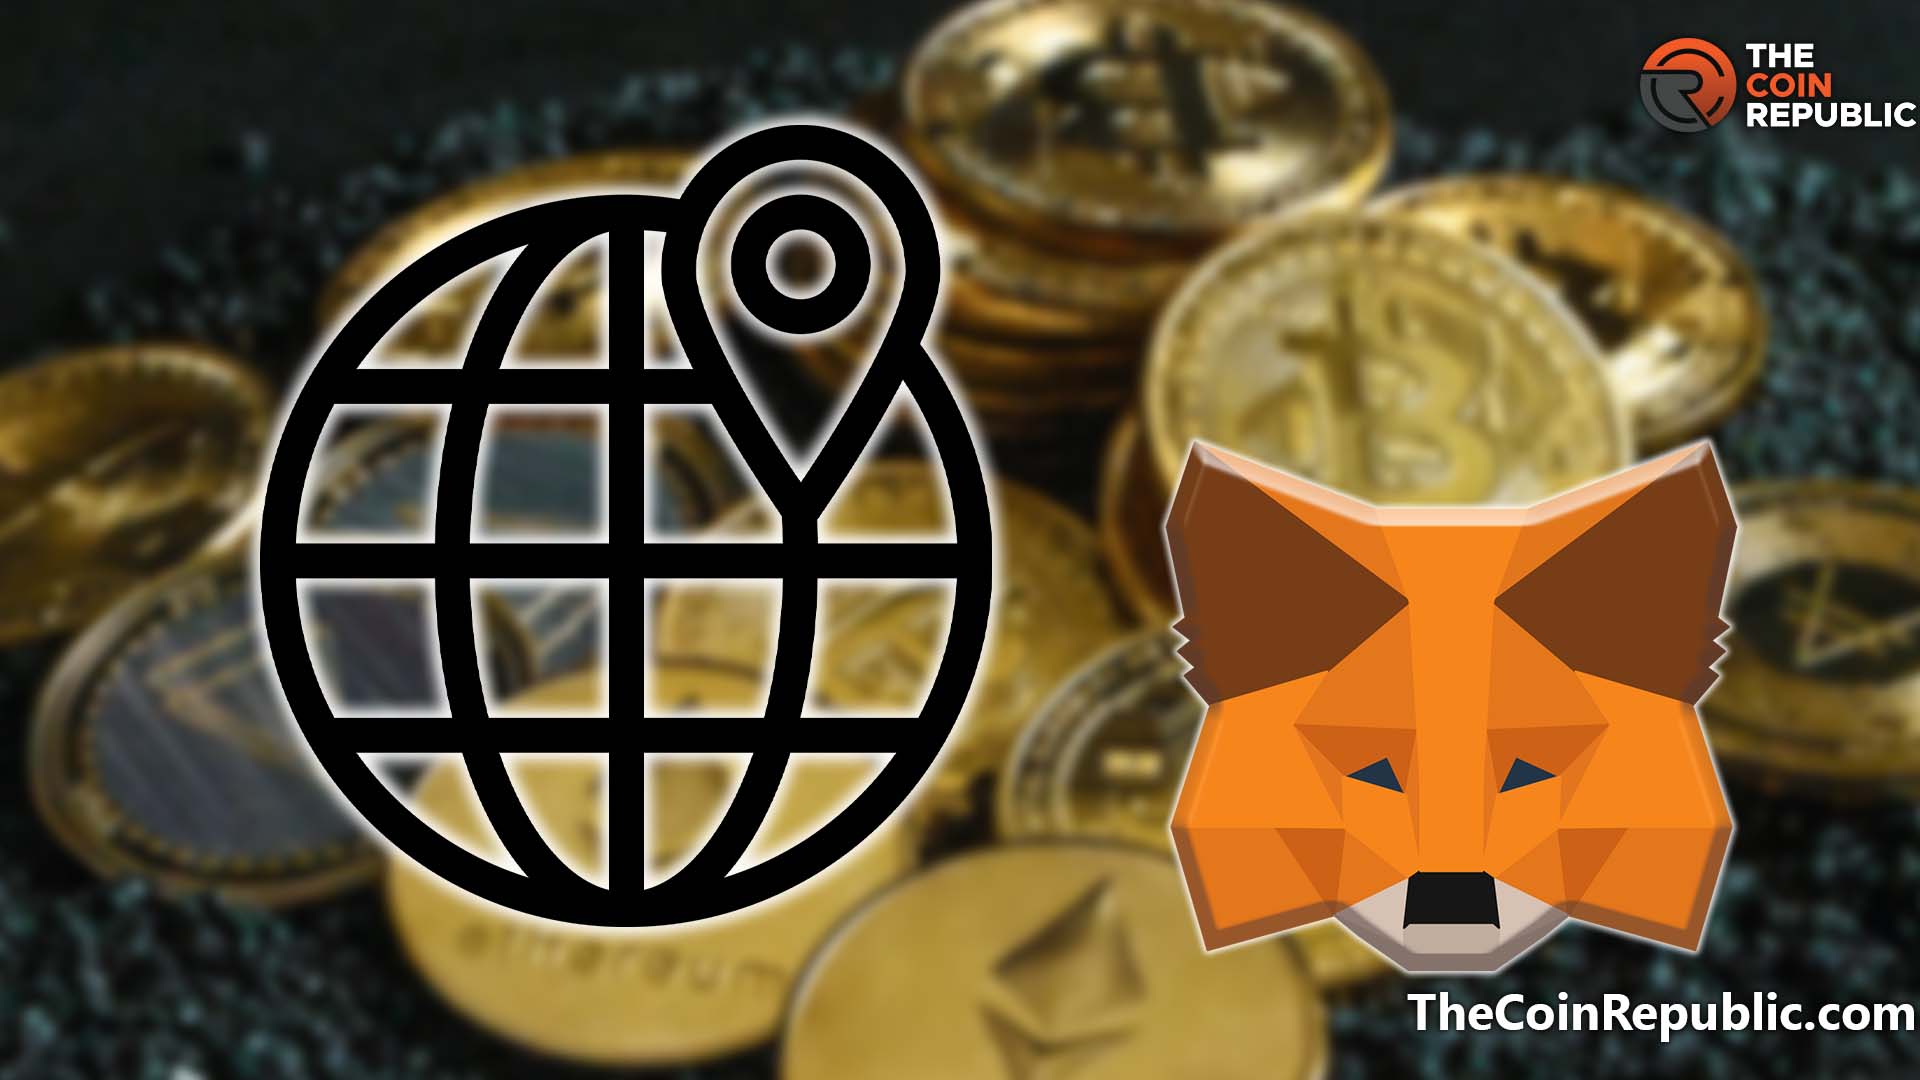 MetaMask Creator Consensys Facing Backlashes on New Privacy Policy 